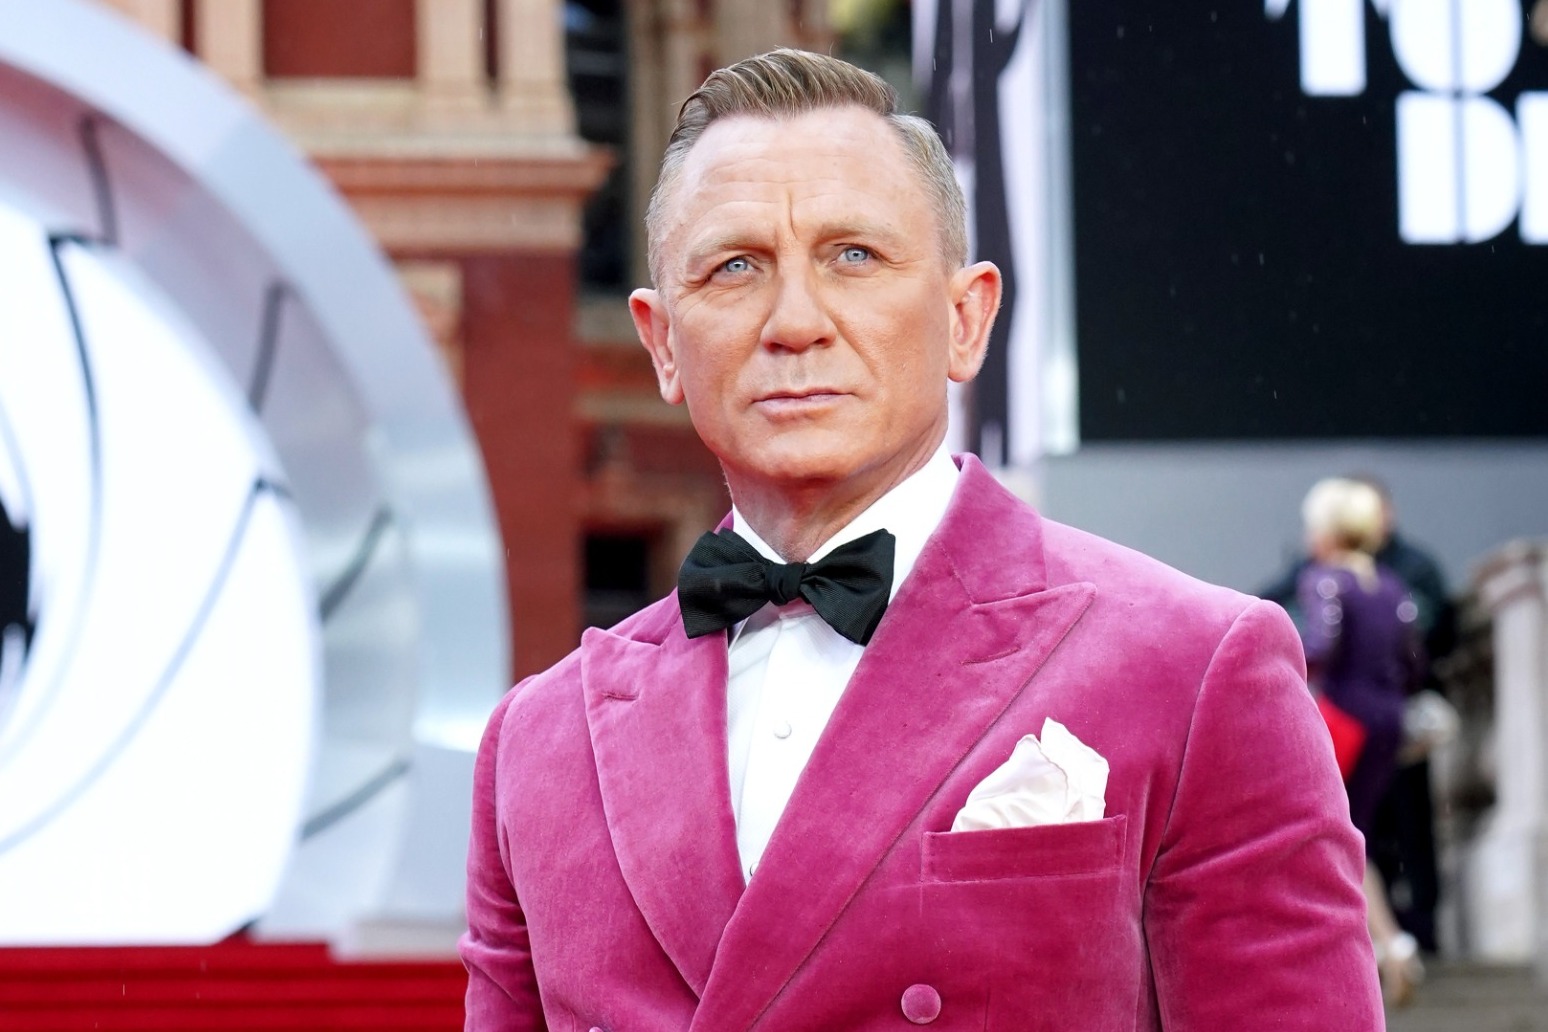 Daniel Craig said he knew there was ‘no going back’ after accepting Bond role 